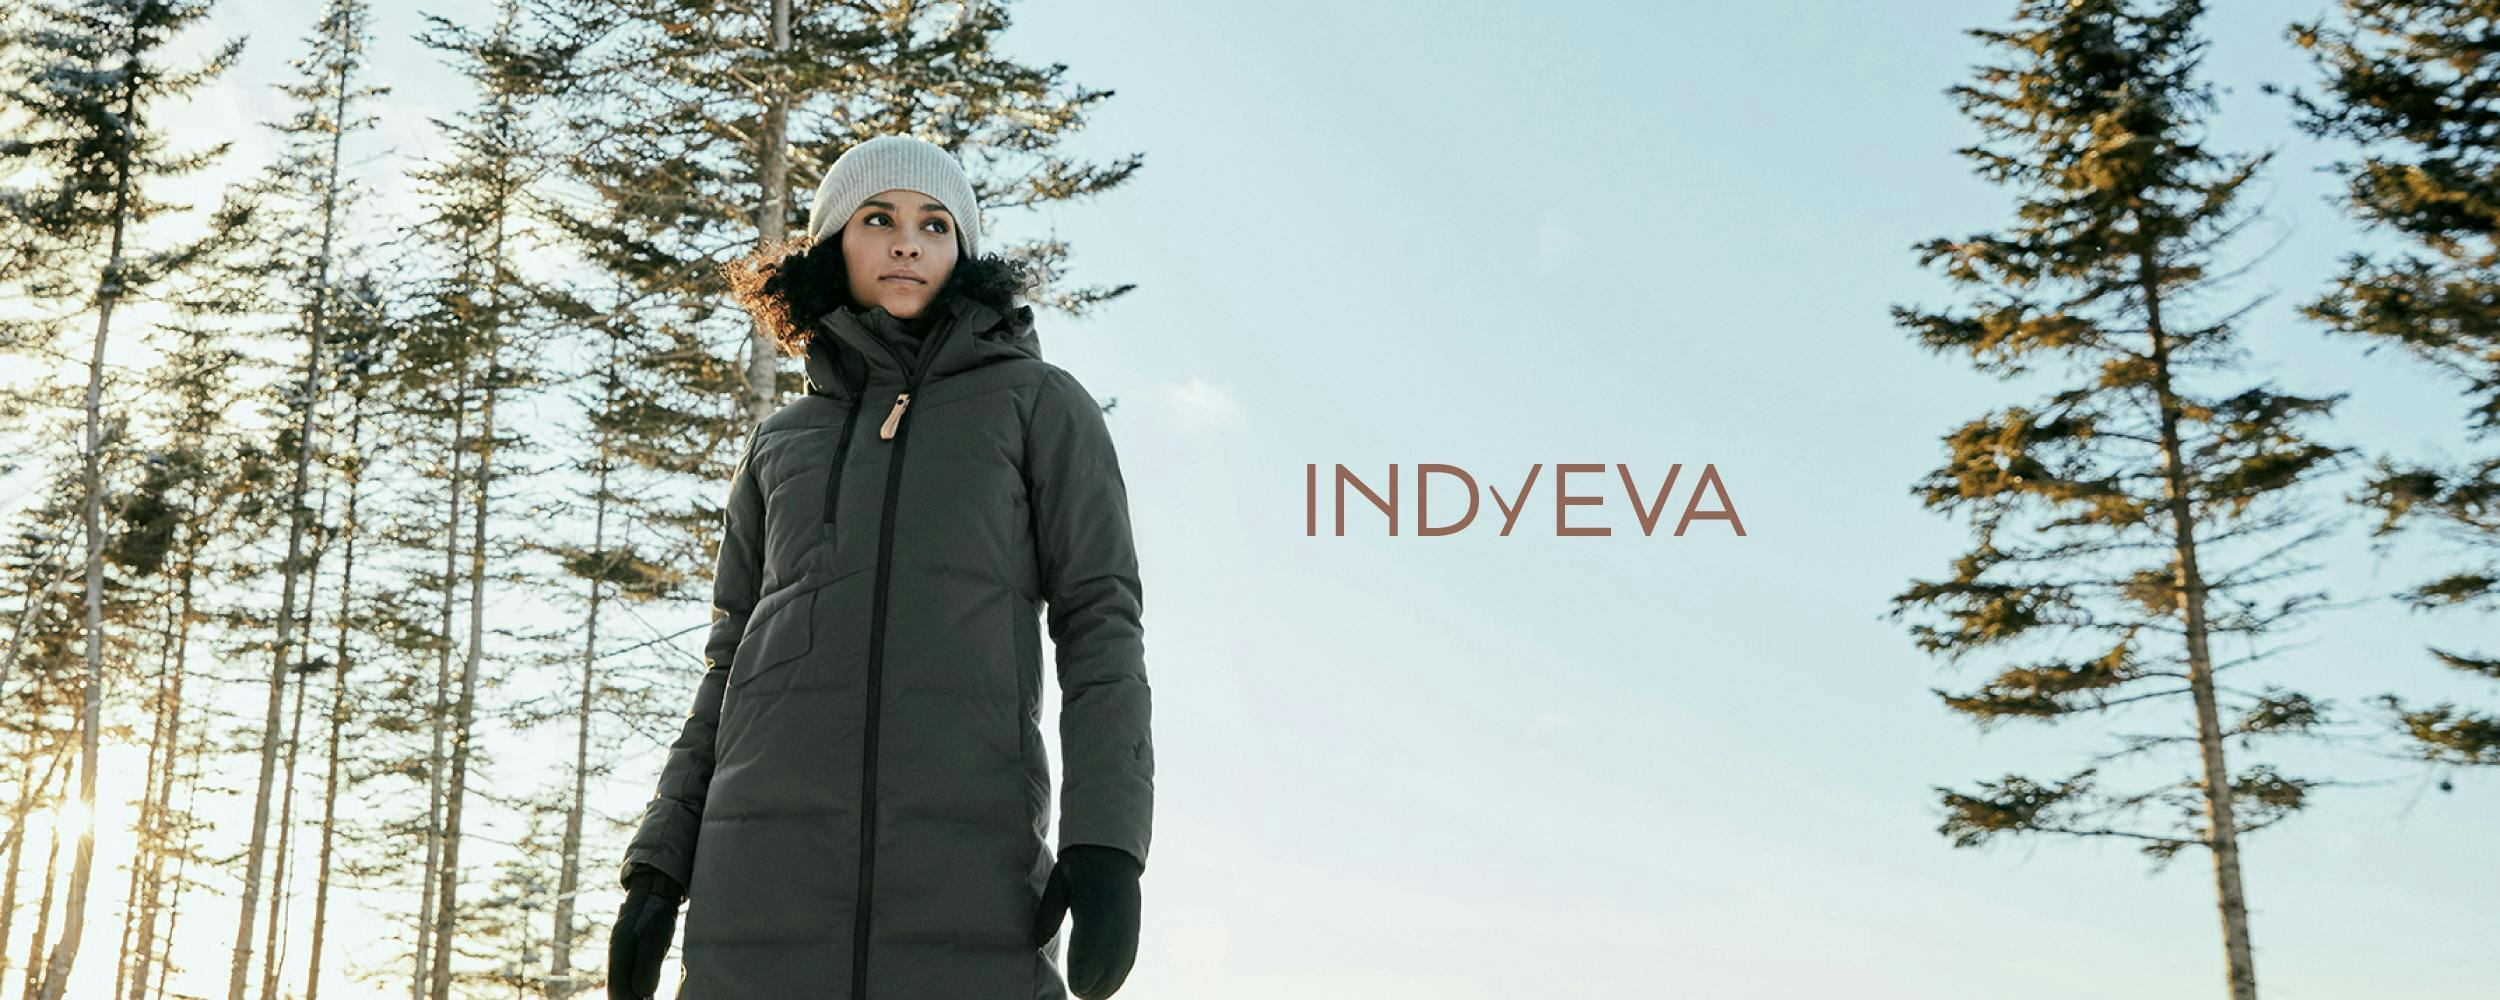 Indyeva makes thoughtful outdoor clothing for adventure-driven women who want to explore in style.